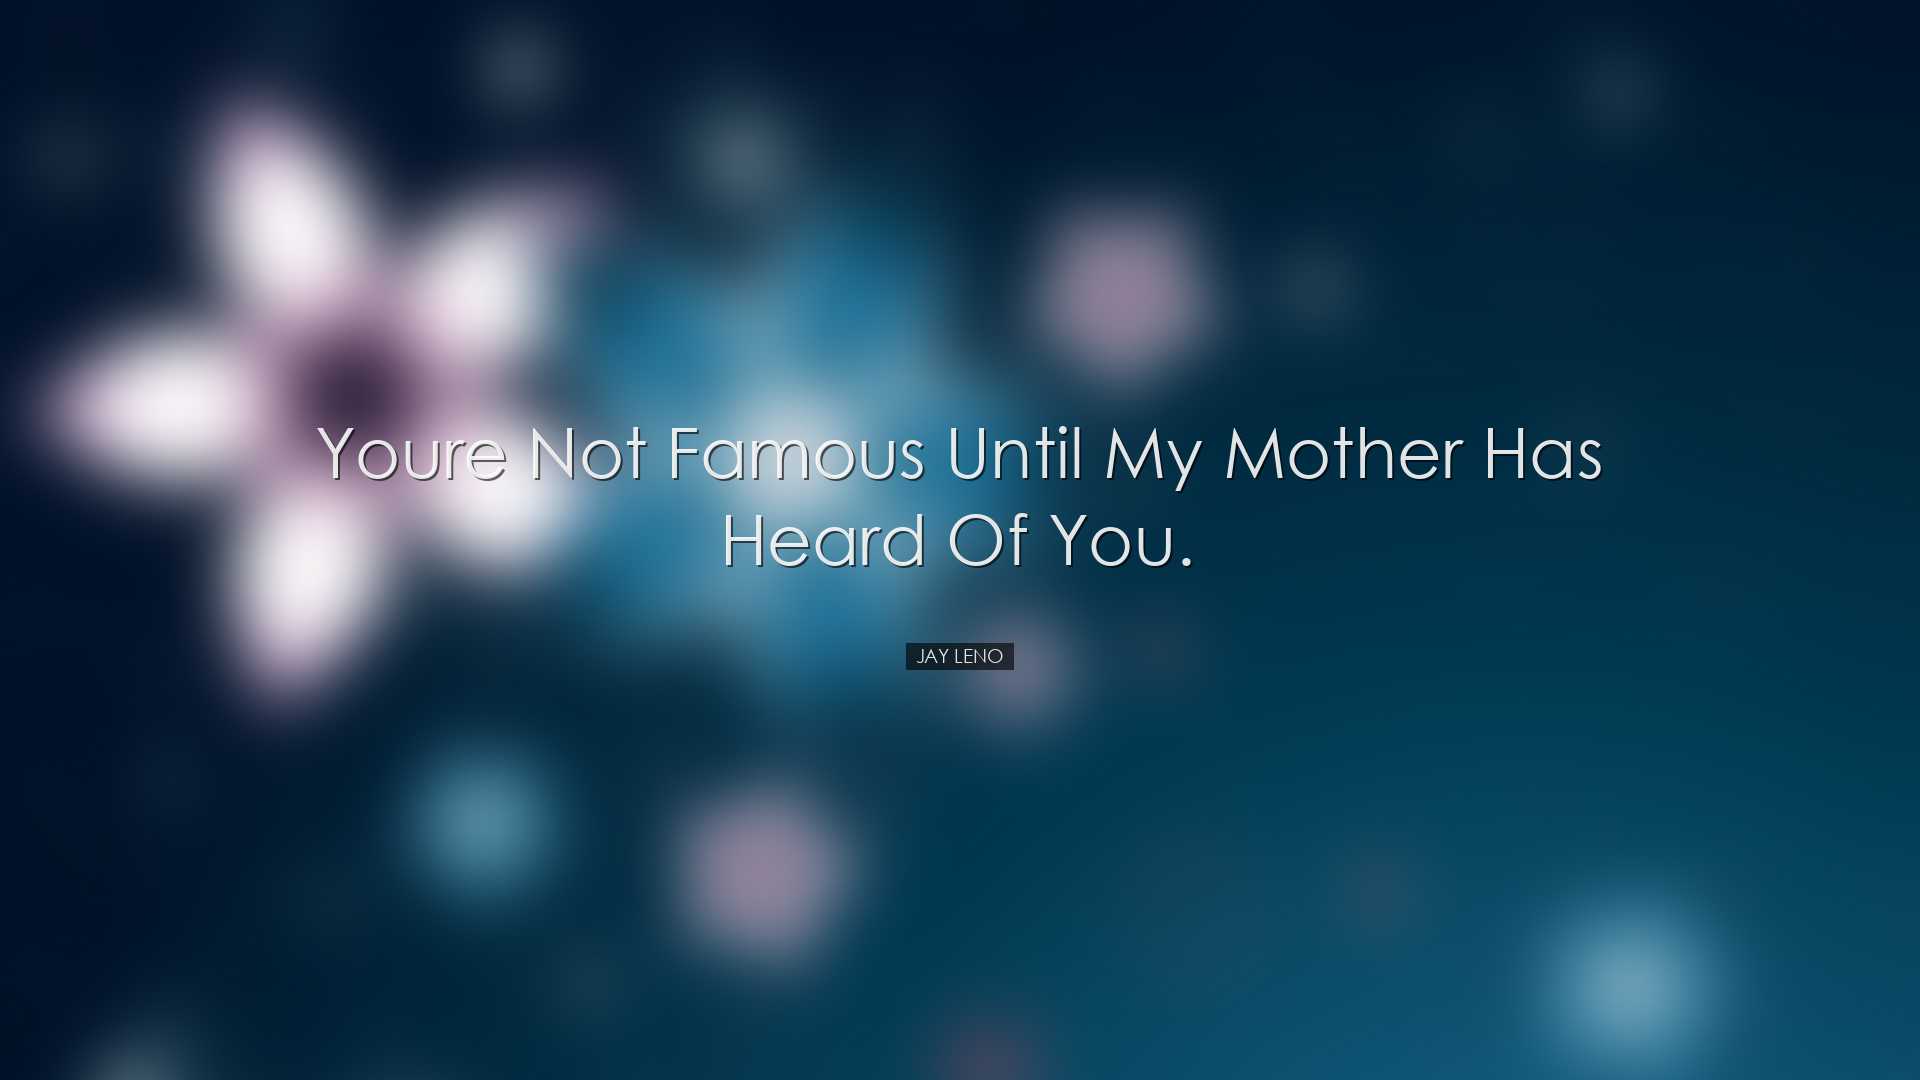 Youre not famous until my mother has heard of you. - Jay Leno